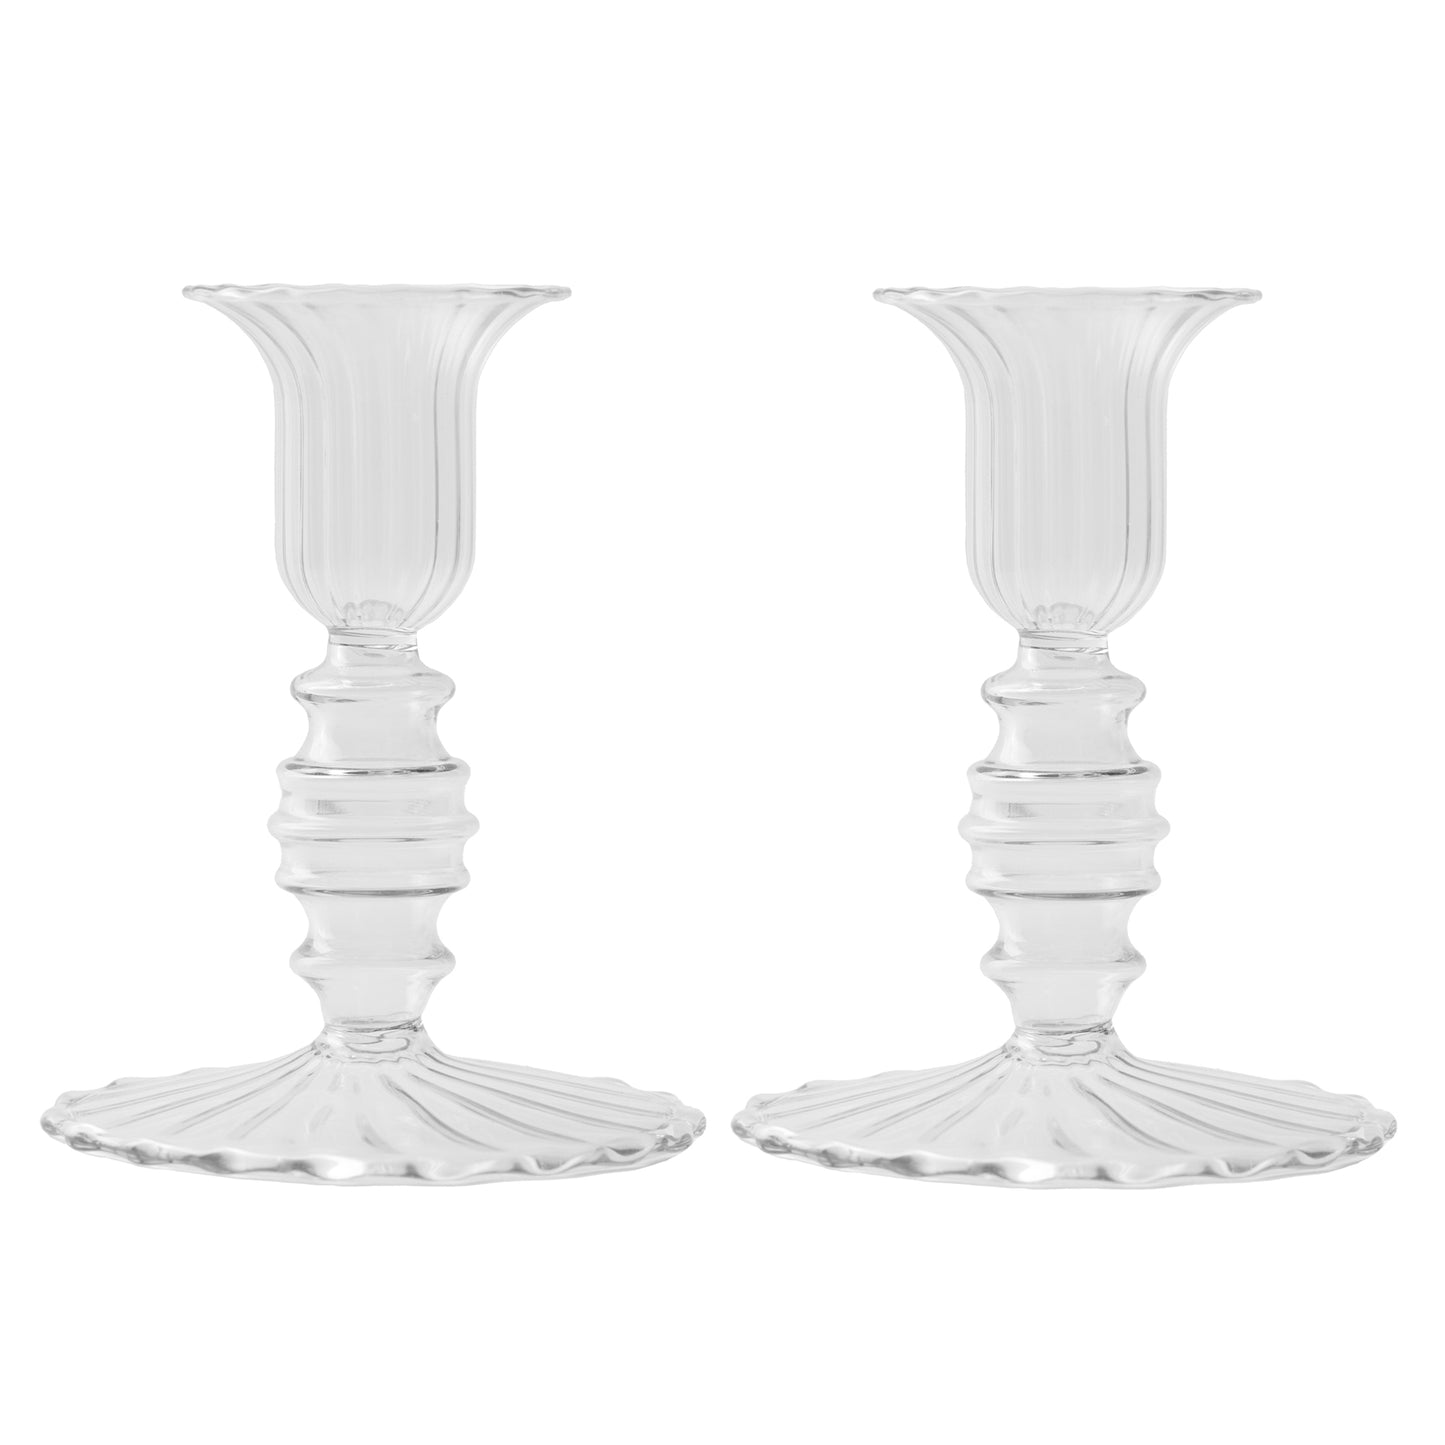 Set of 2 - Glass Candle Holder - Clear Flute